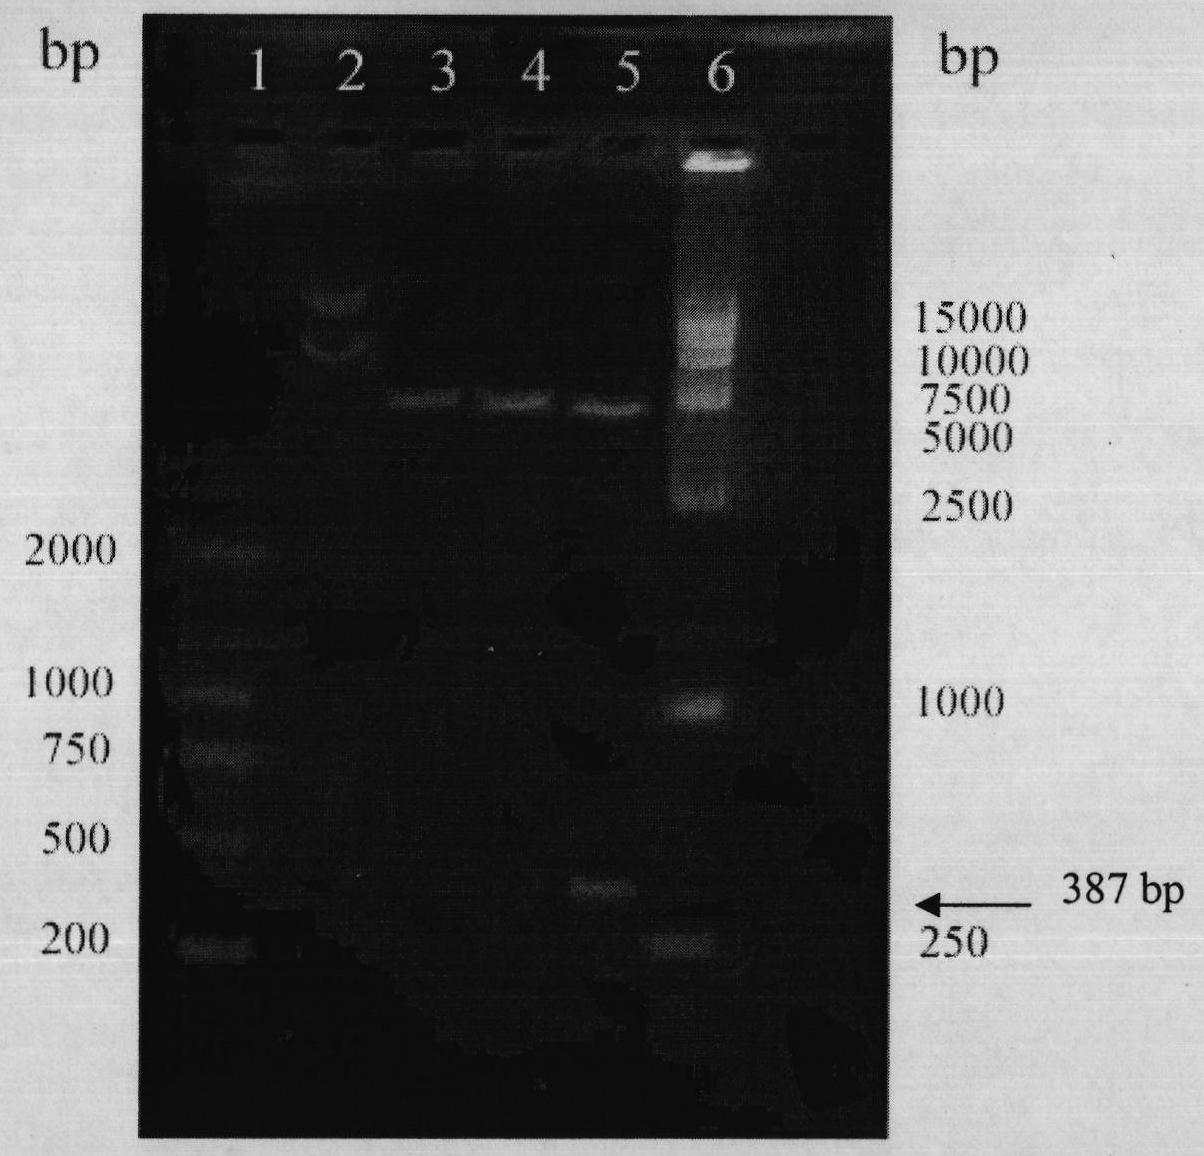 Cell-penetrating peptide (Arg) 9 and lidamycin fusion protein (Arg) 9-LDP